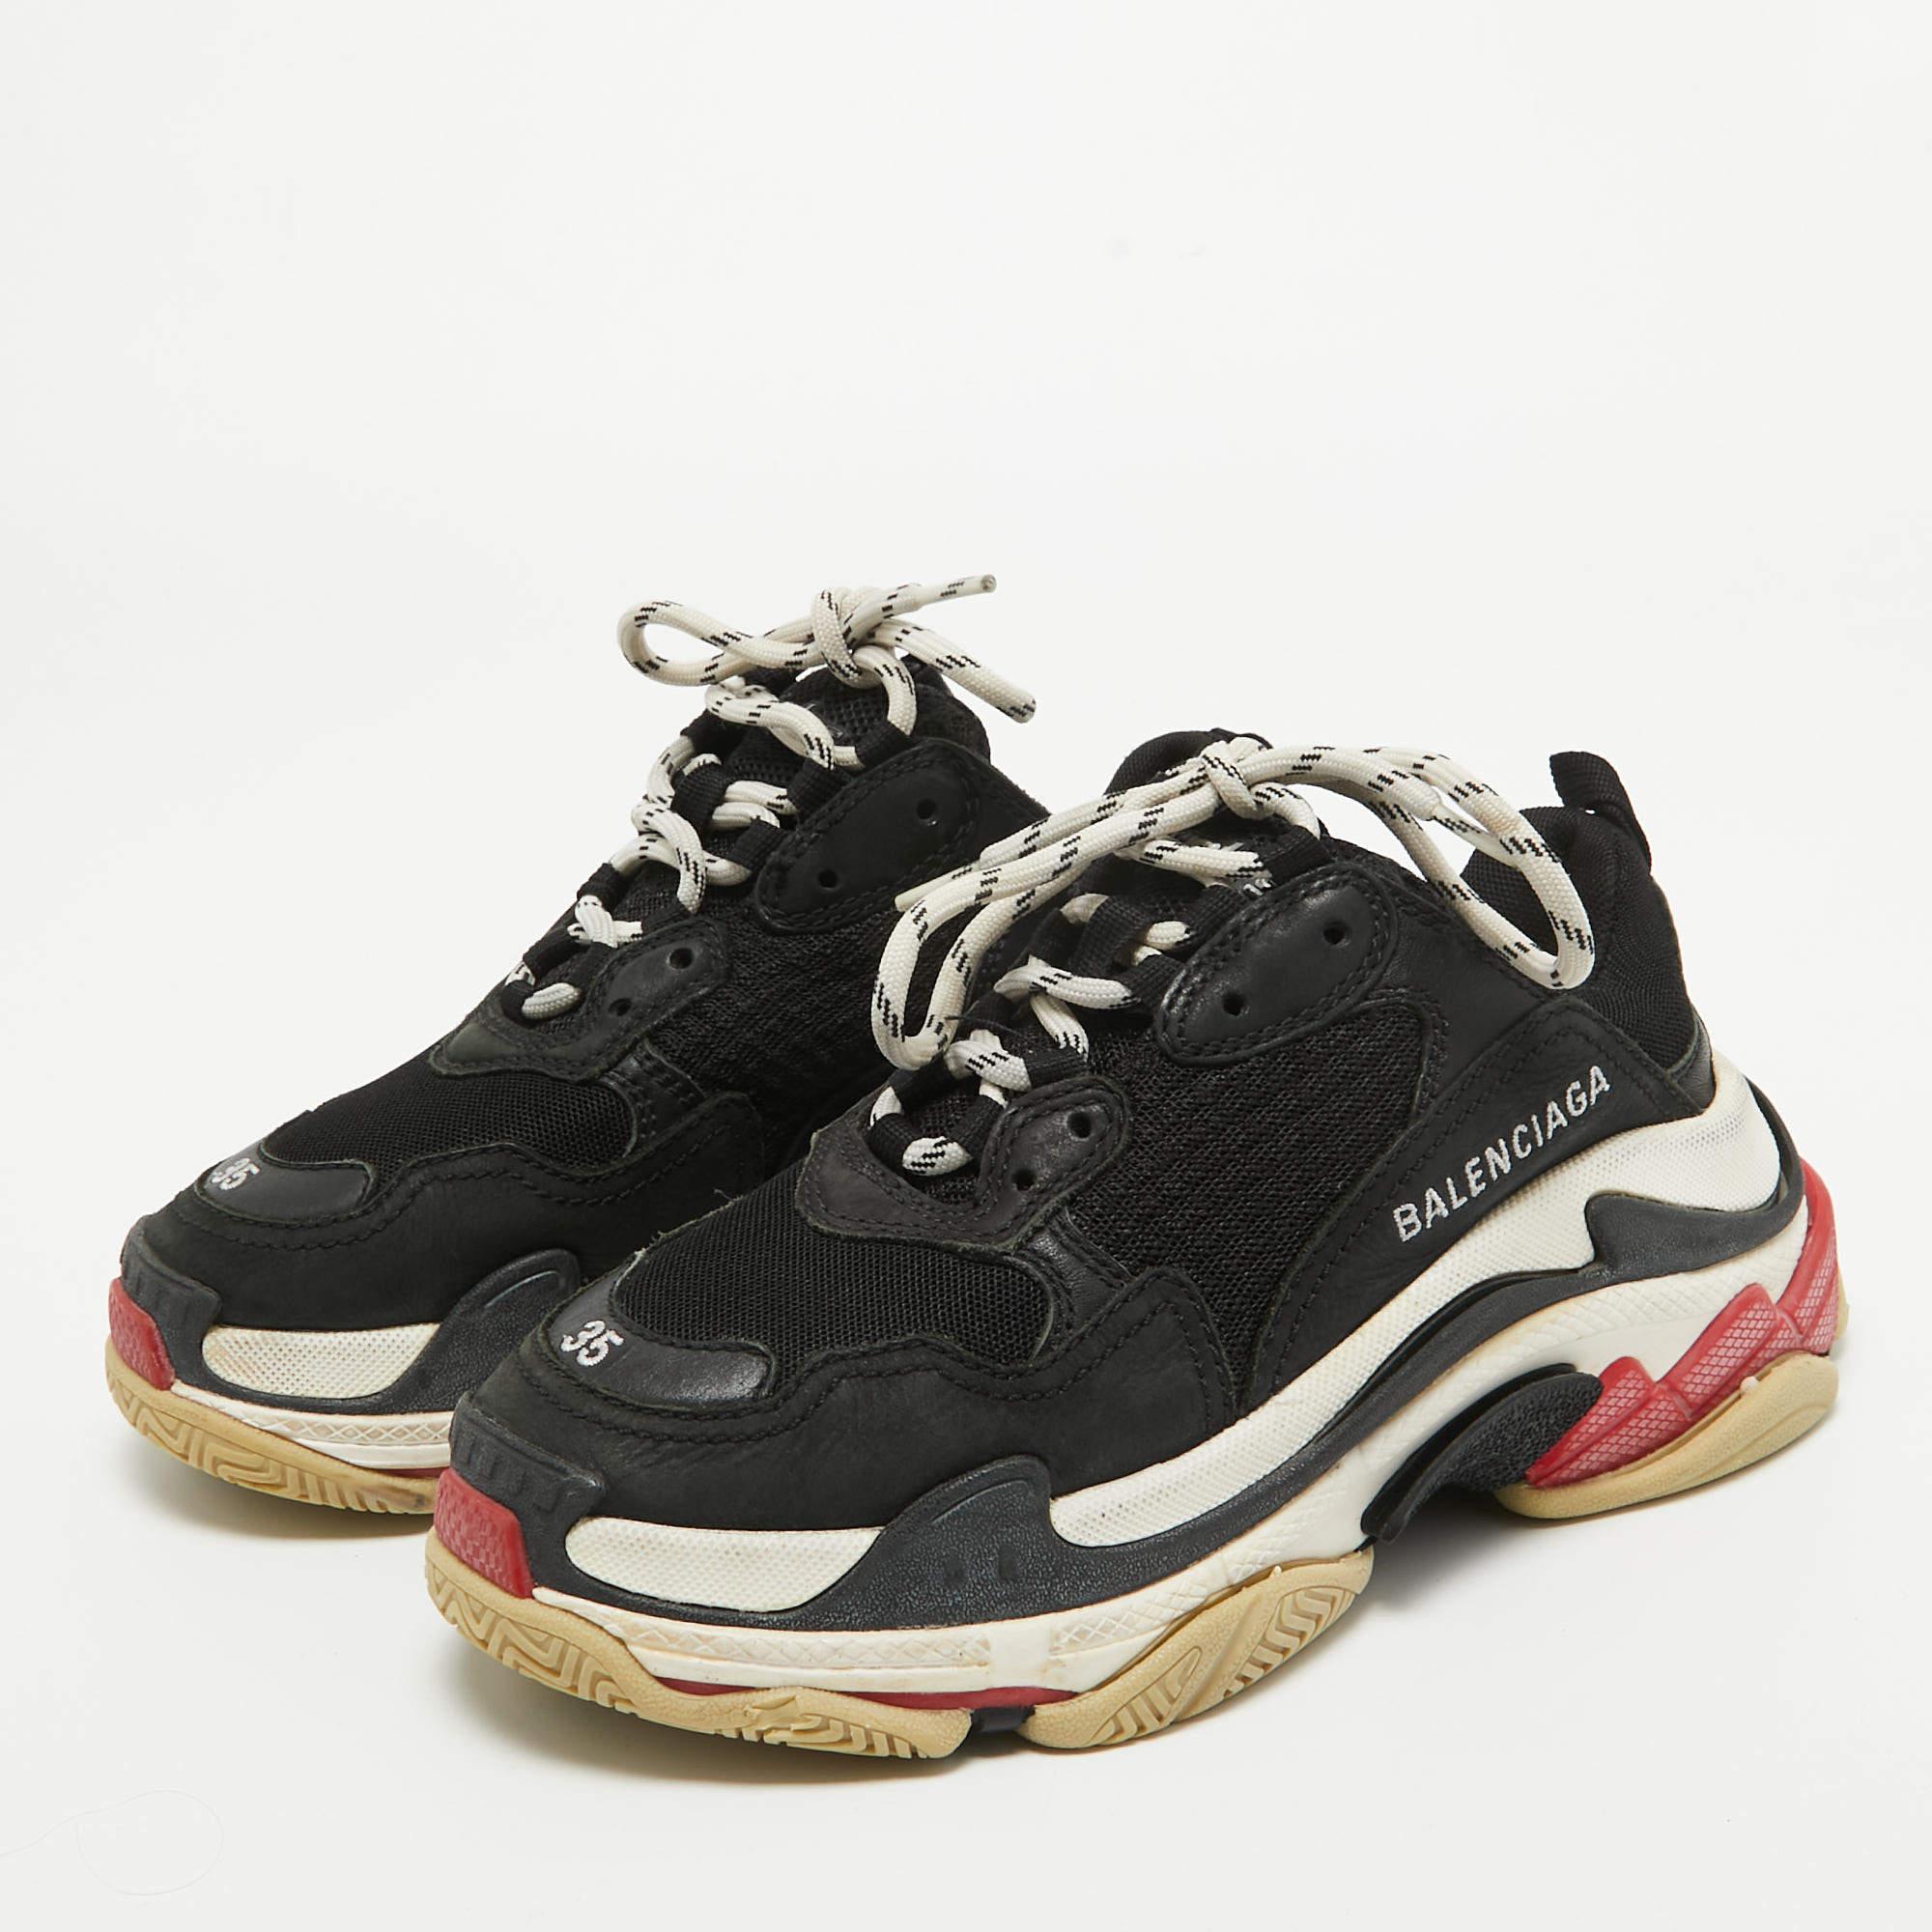 Balenciaga Black Mesh and Nubuck Leather Triple S Sneakers Size 35 For Sale 2